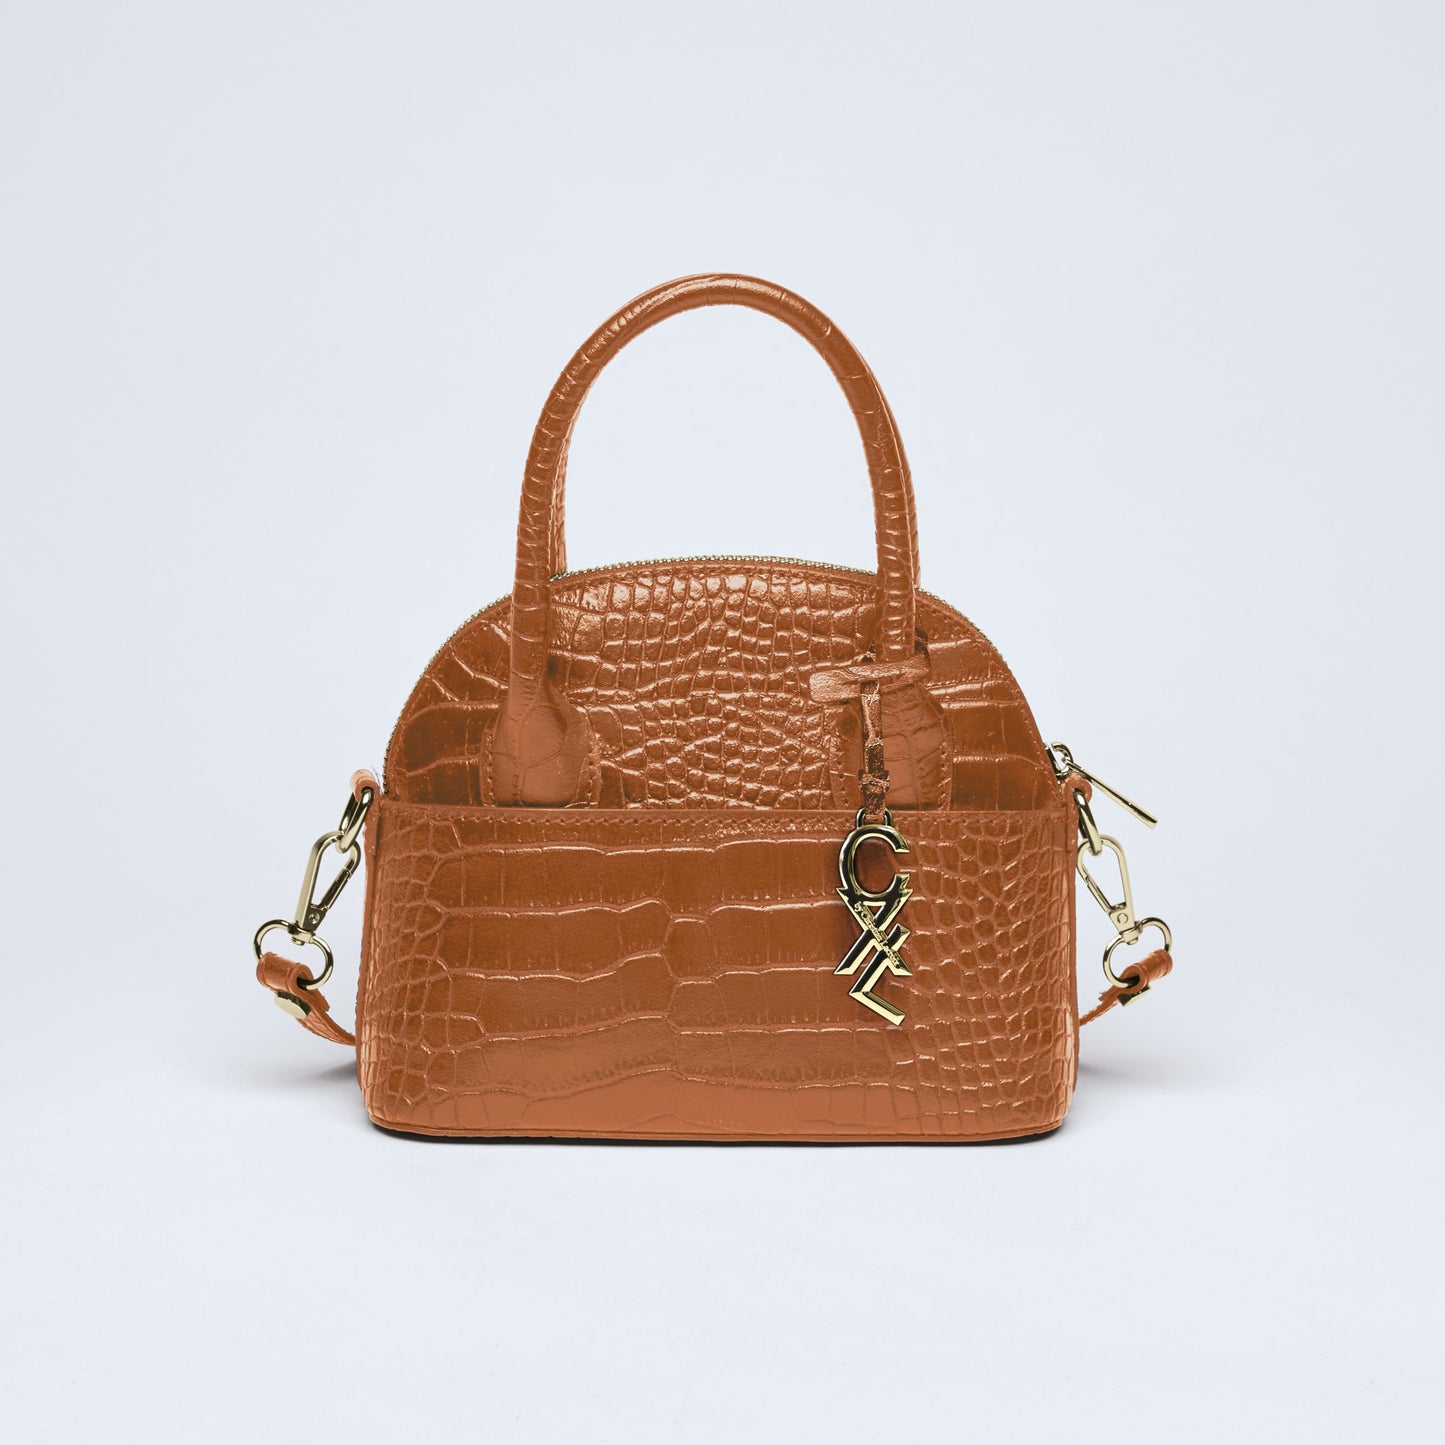 Small croco leather bowling bag Bel-air